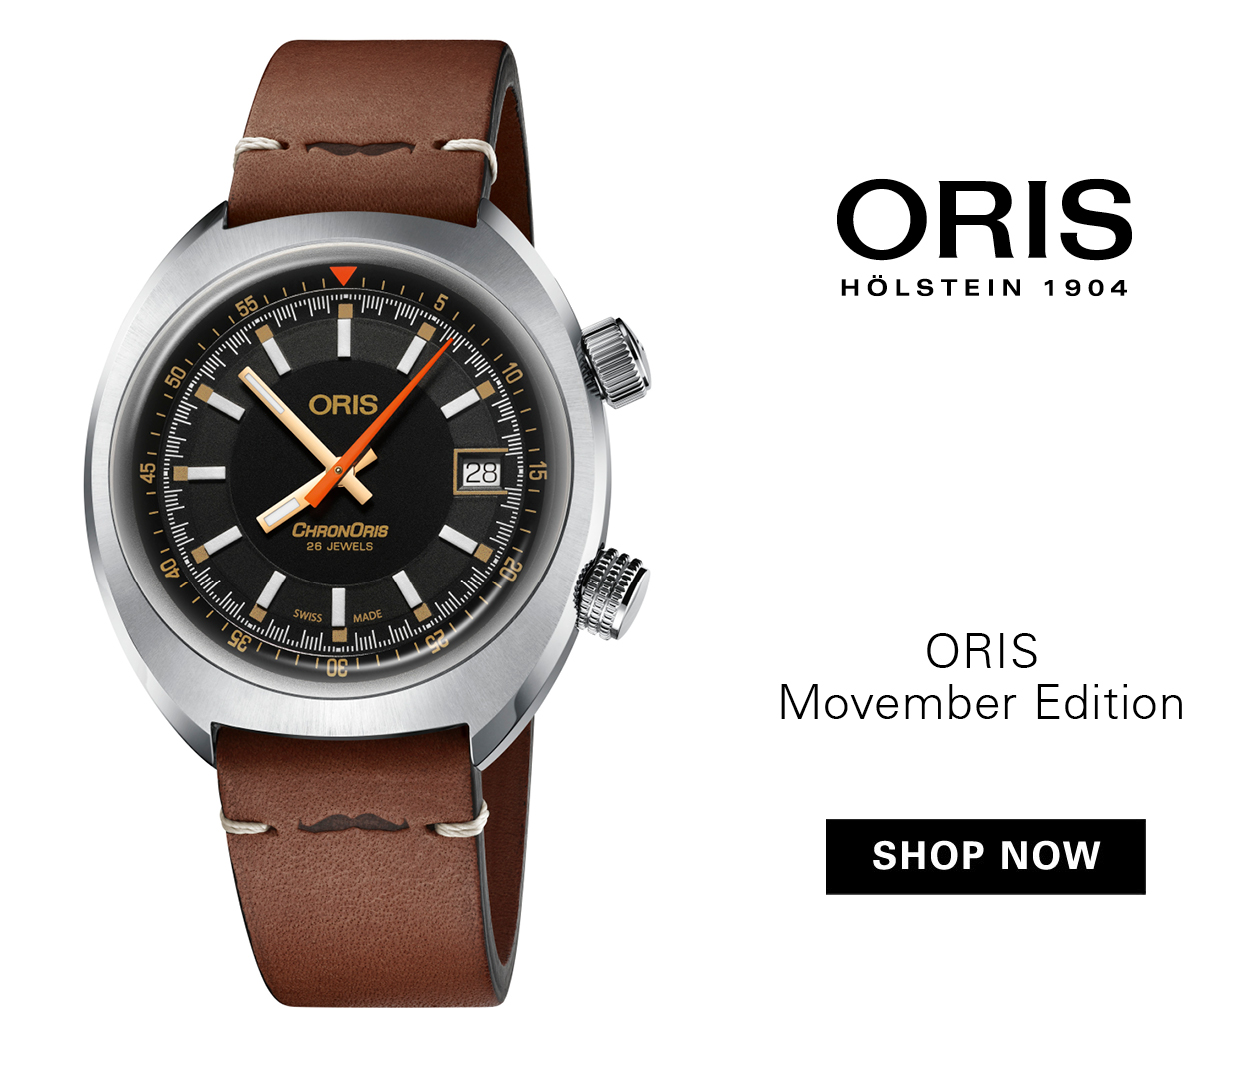 Check Out the ORIS Movember Edition. Shop Now!